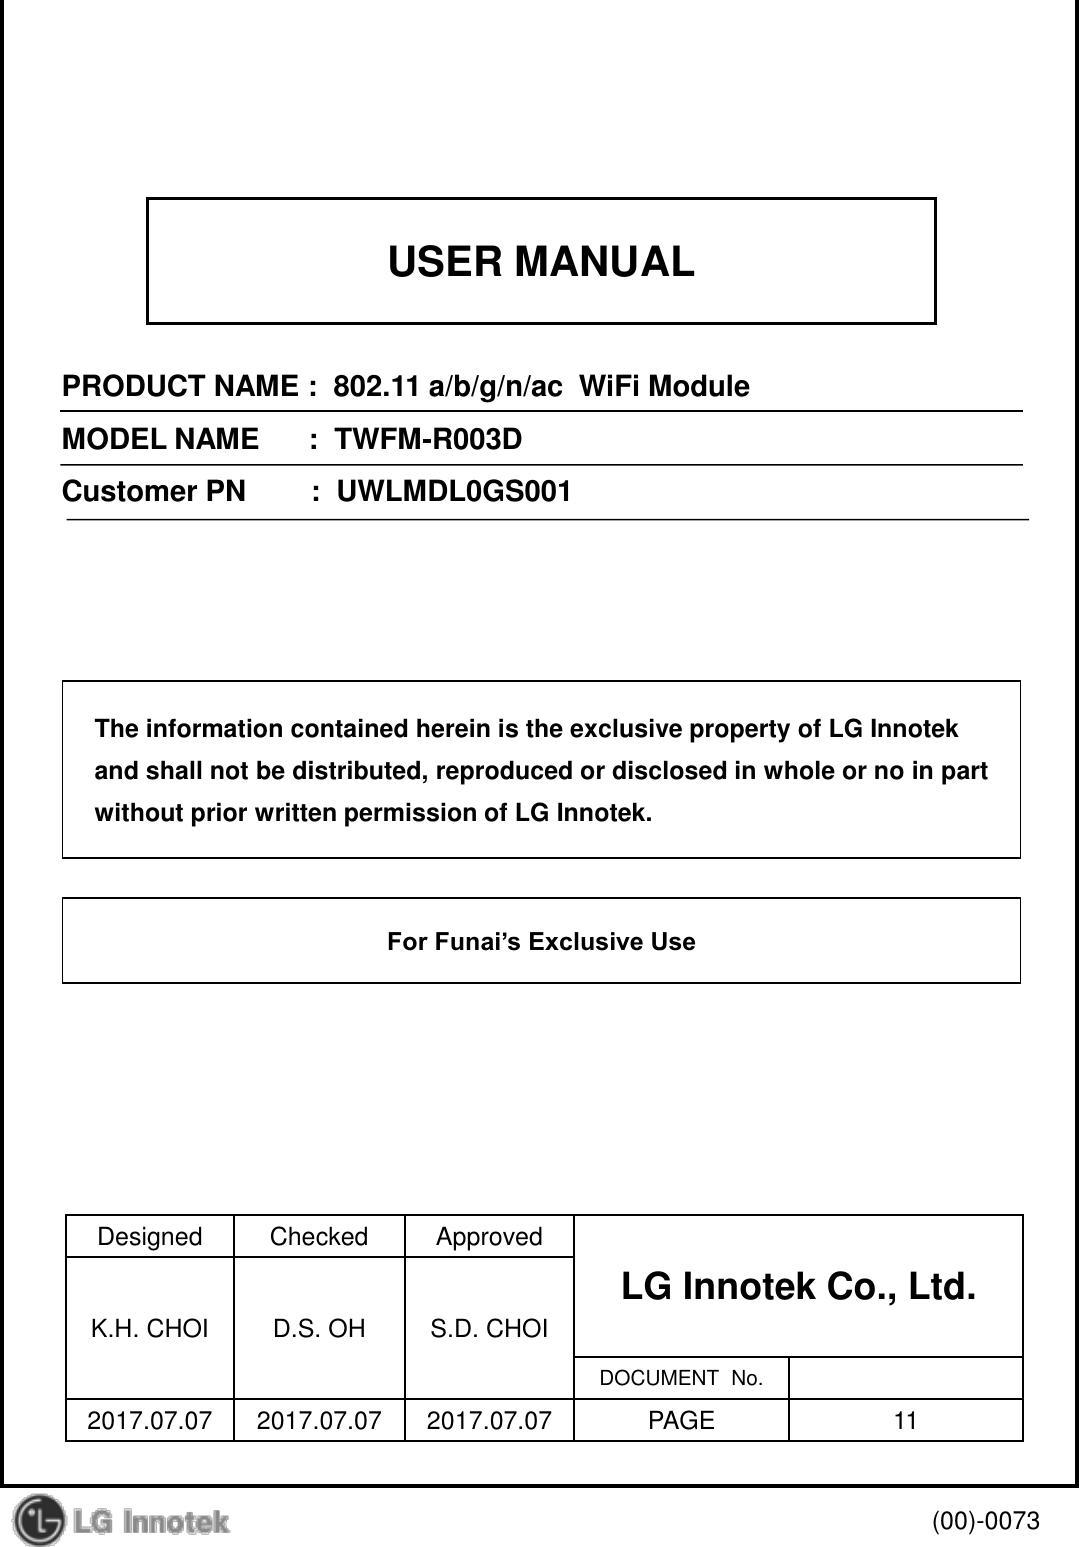 USER MANUAL PRODUCT NAME :  802.11 a/b/g/n/ac  WiFi Module MODEL NAME      :  TWFM-R003D Customer PN        :  UWLMDL0GS001 Designed  Checked  Approved LG Innotek Co., Ltd.    K.H. CHOI  D.S. OH  S.D. CHOI DOCUMENT  No. 2017.07.07  2017.07.07  2017.07.07  PAGE  11 (00)-0073 The information contained herein is the exclusive property of LG Innotek and shall not be distributed, reproduced or disclosed in whole or no in part without prior written permission of LG Innotek. For Funai’s Exclusive Use 